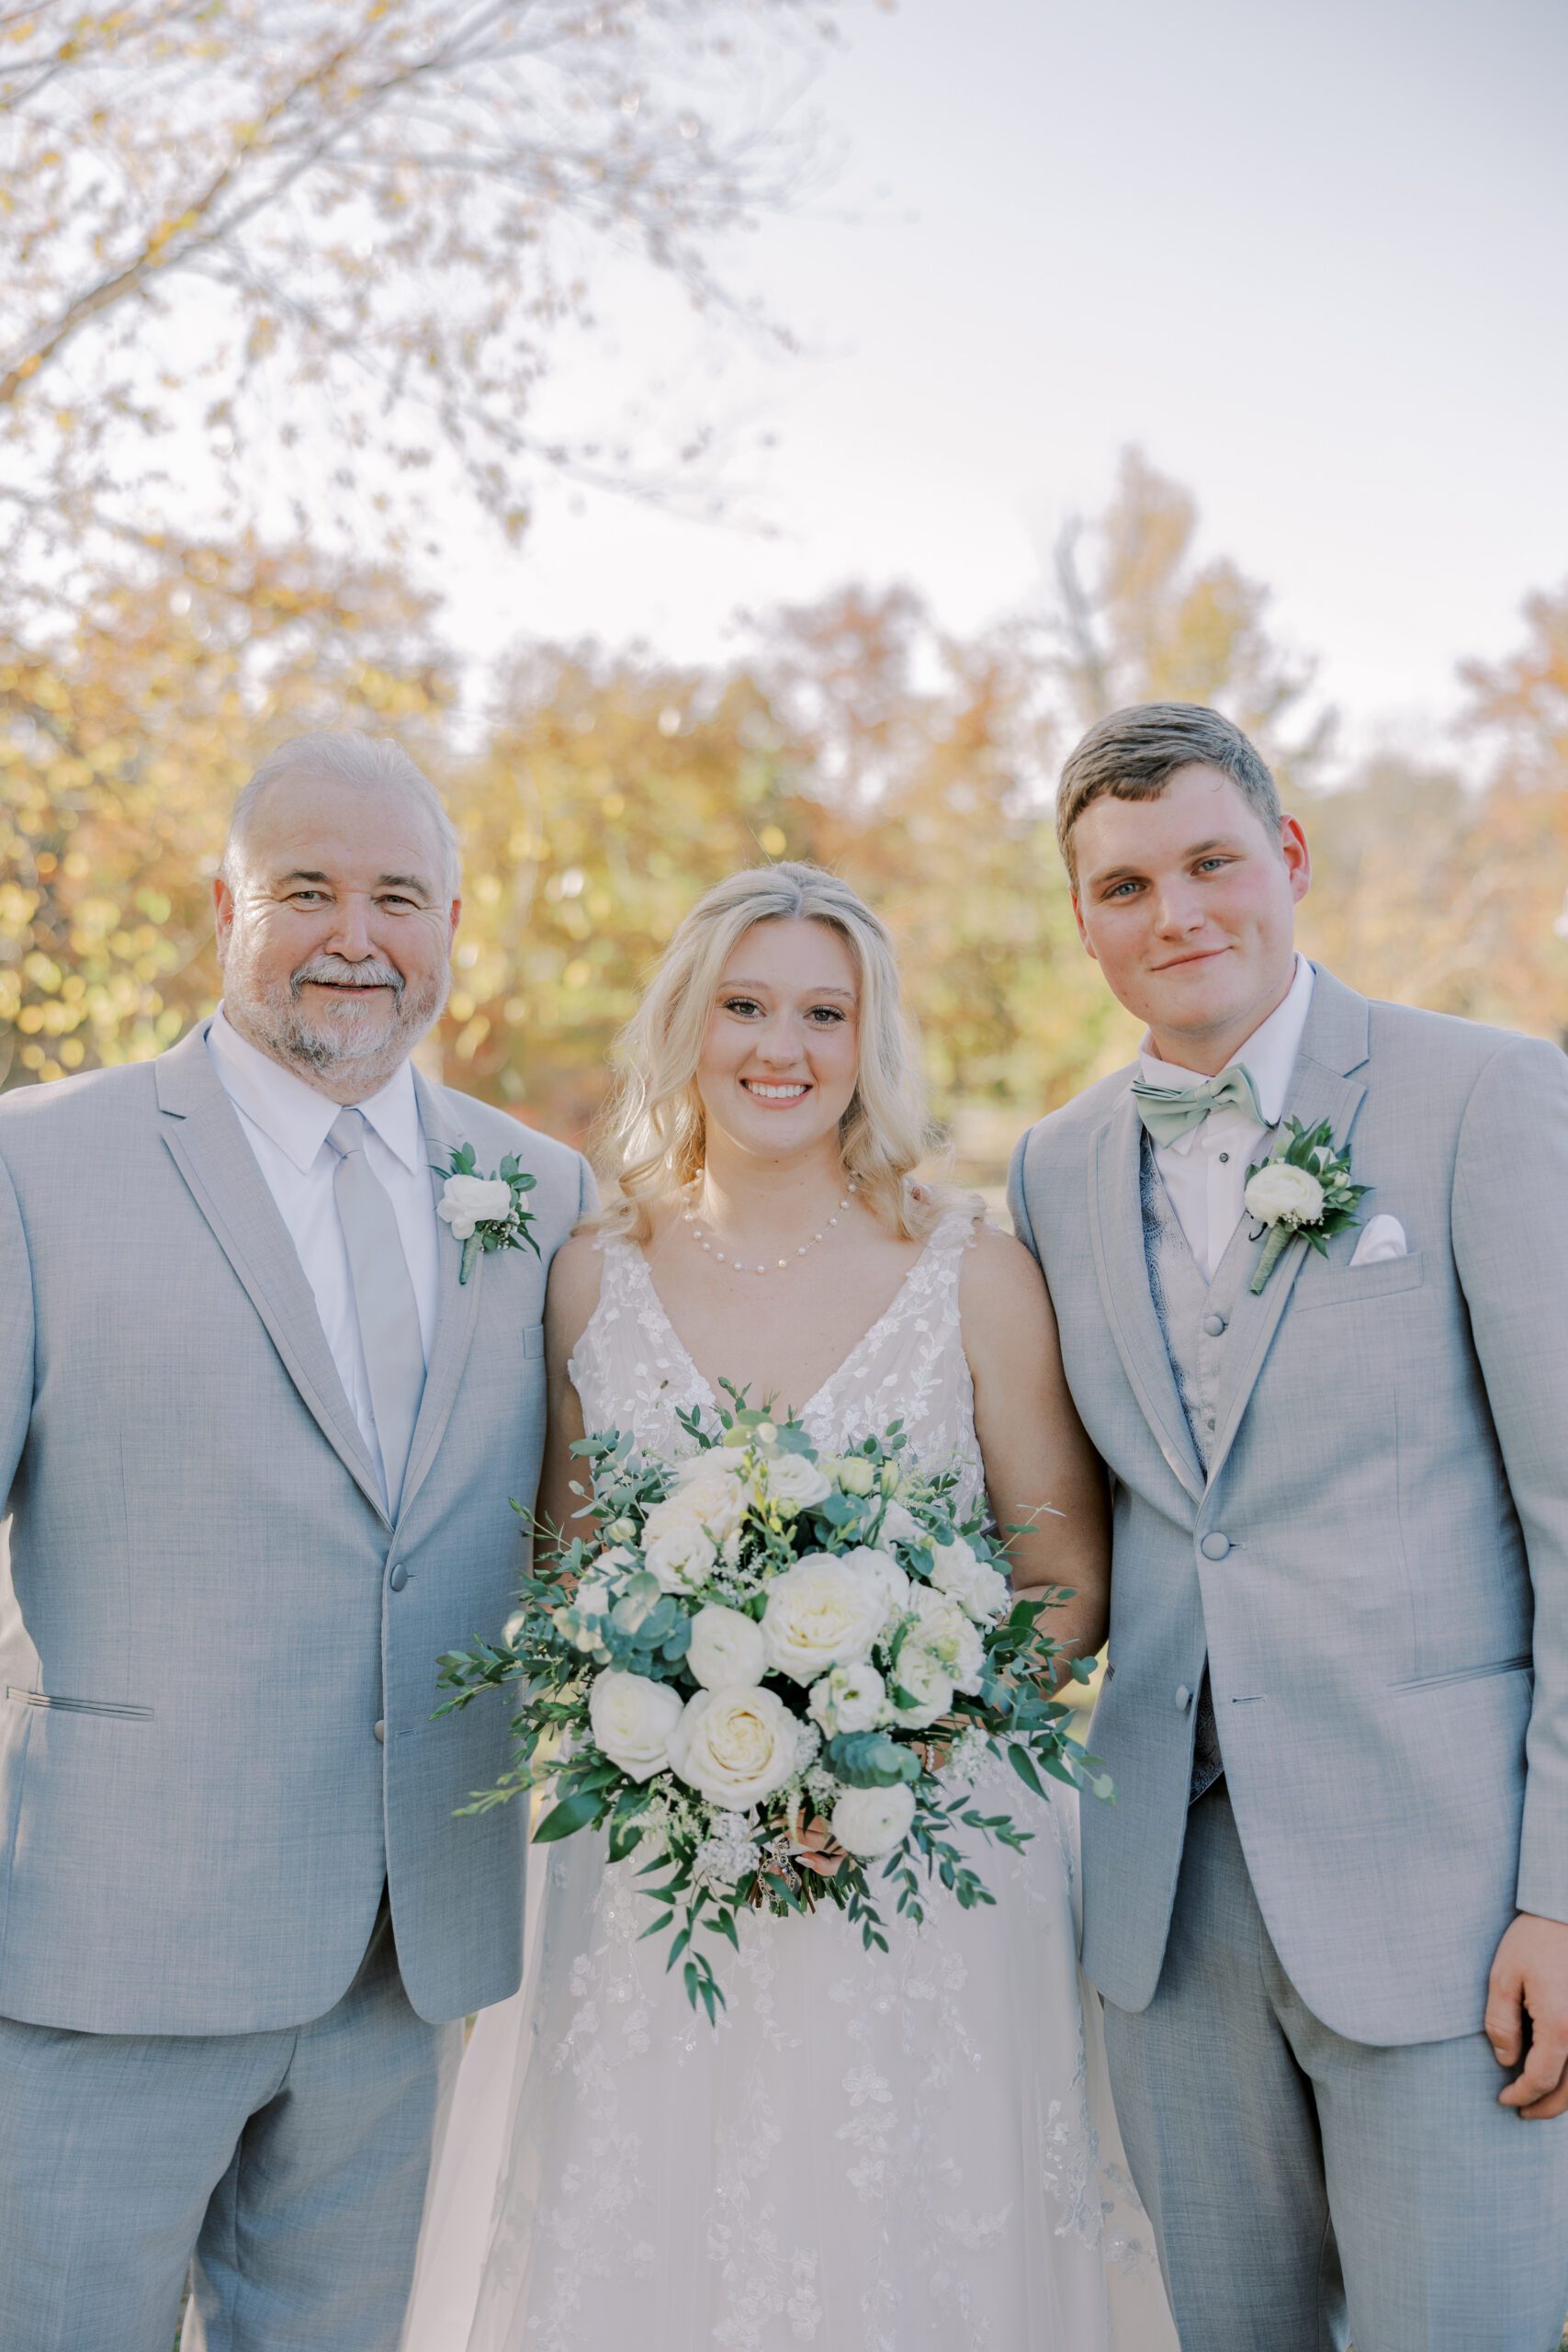 Bride and groom pictured with their officiant, bride in middle holding her bouquet of flowers, all 3 people looking and smiling at camera